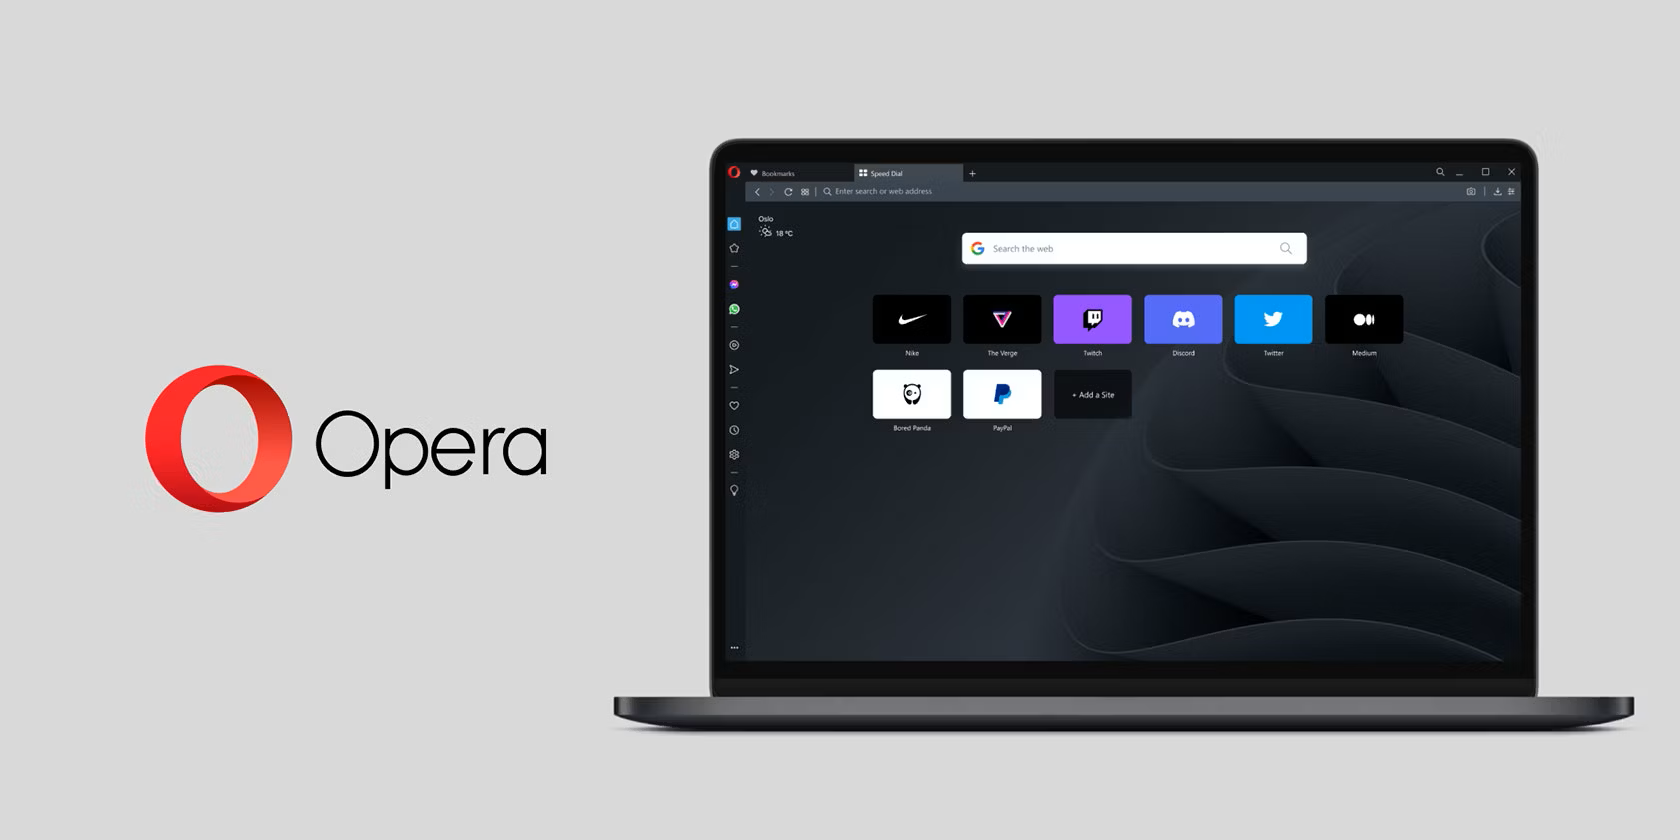 Opera updates its browser to add support for local AI models